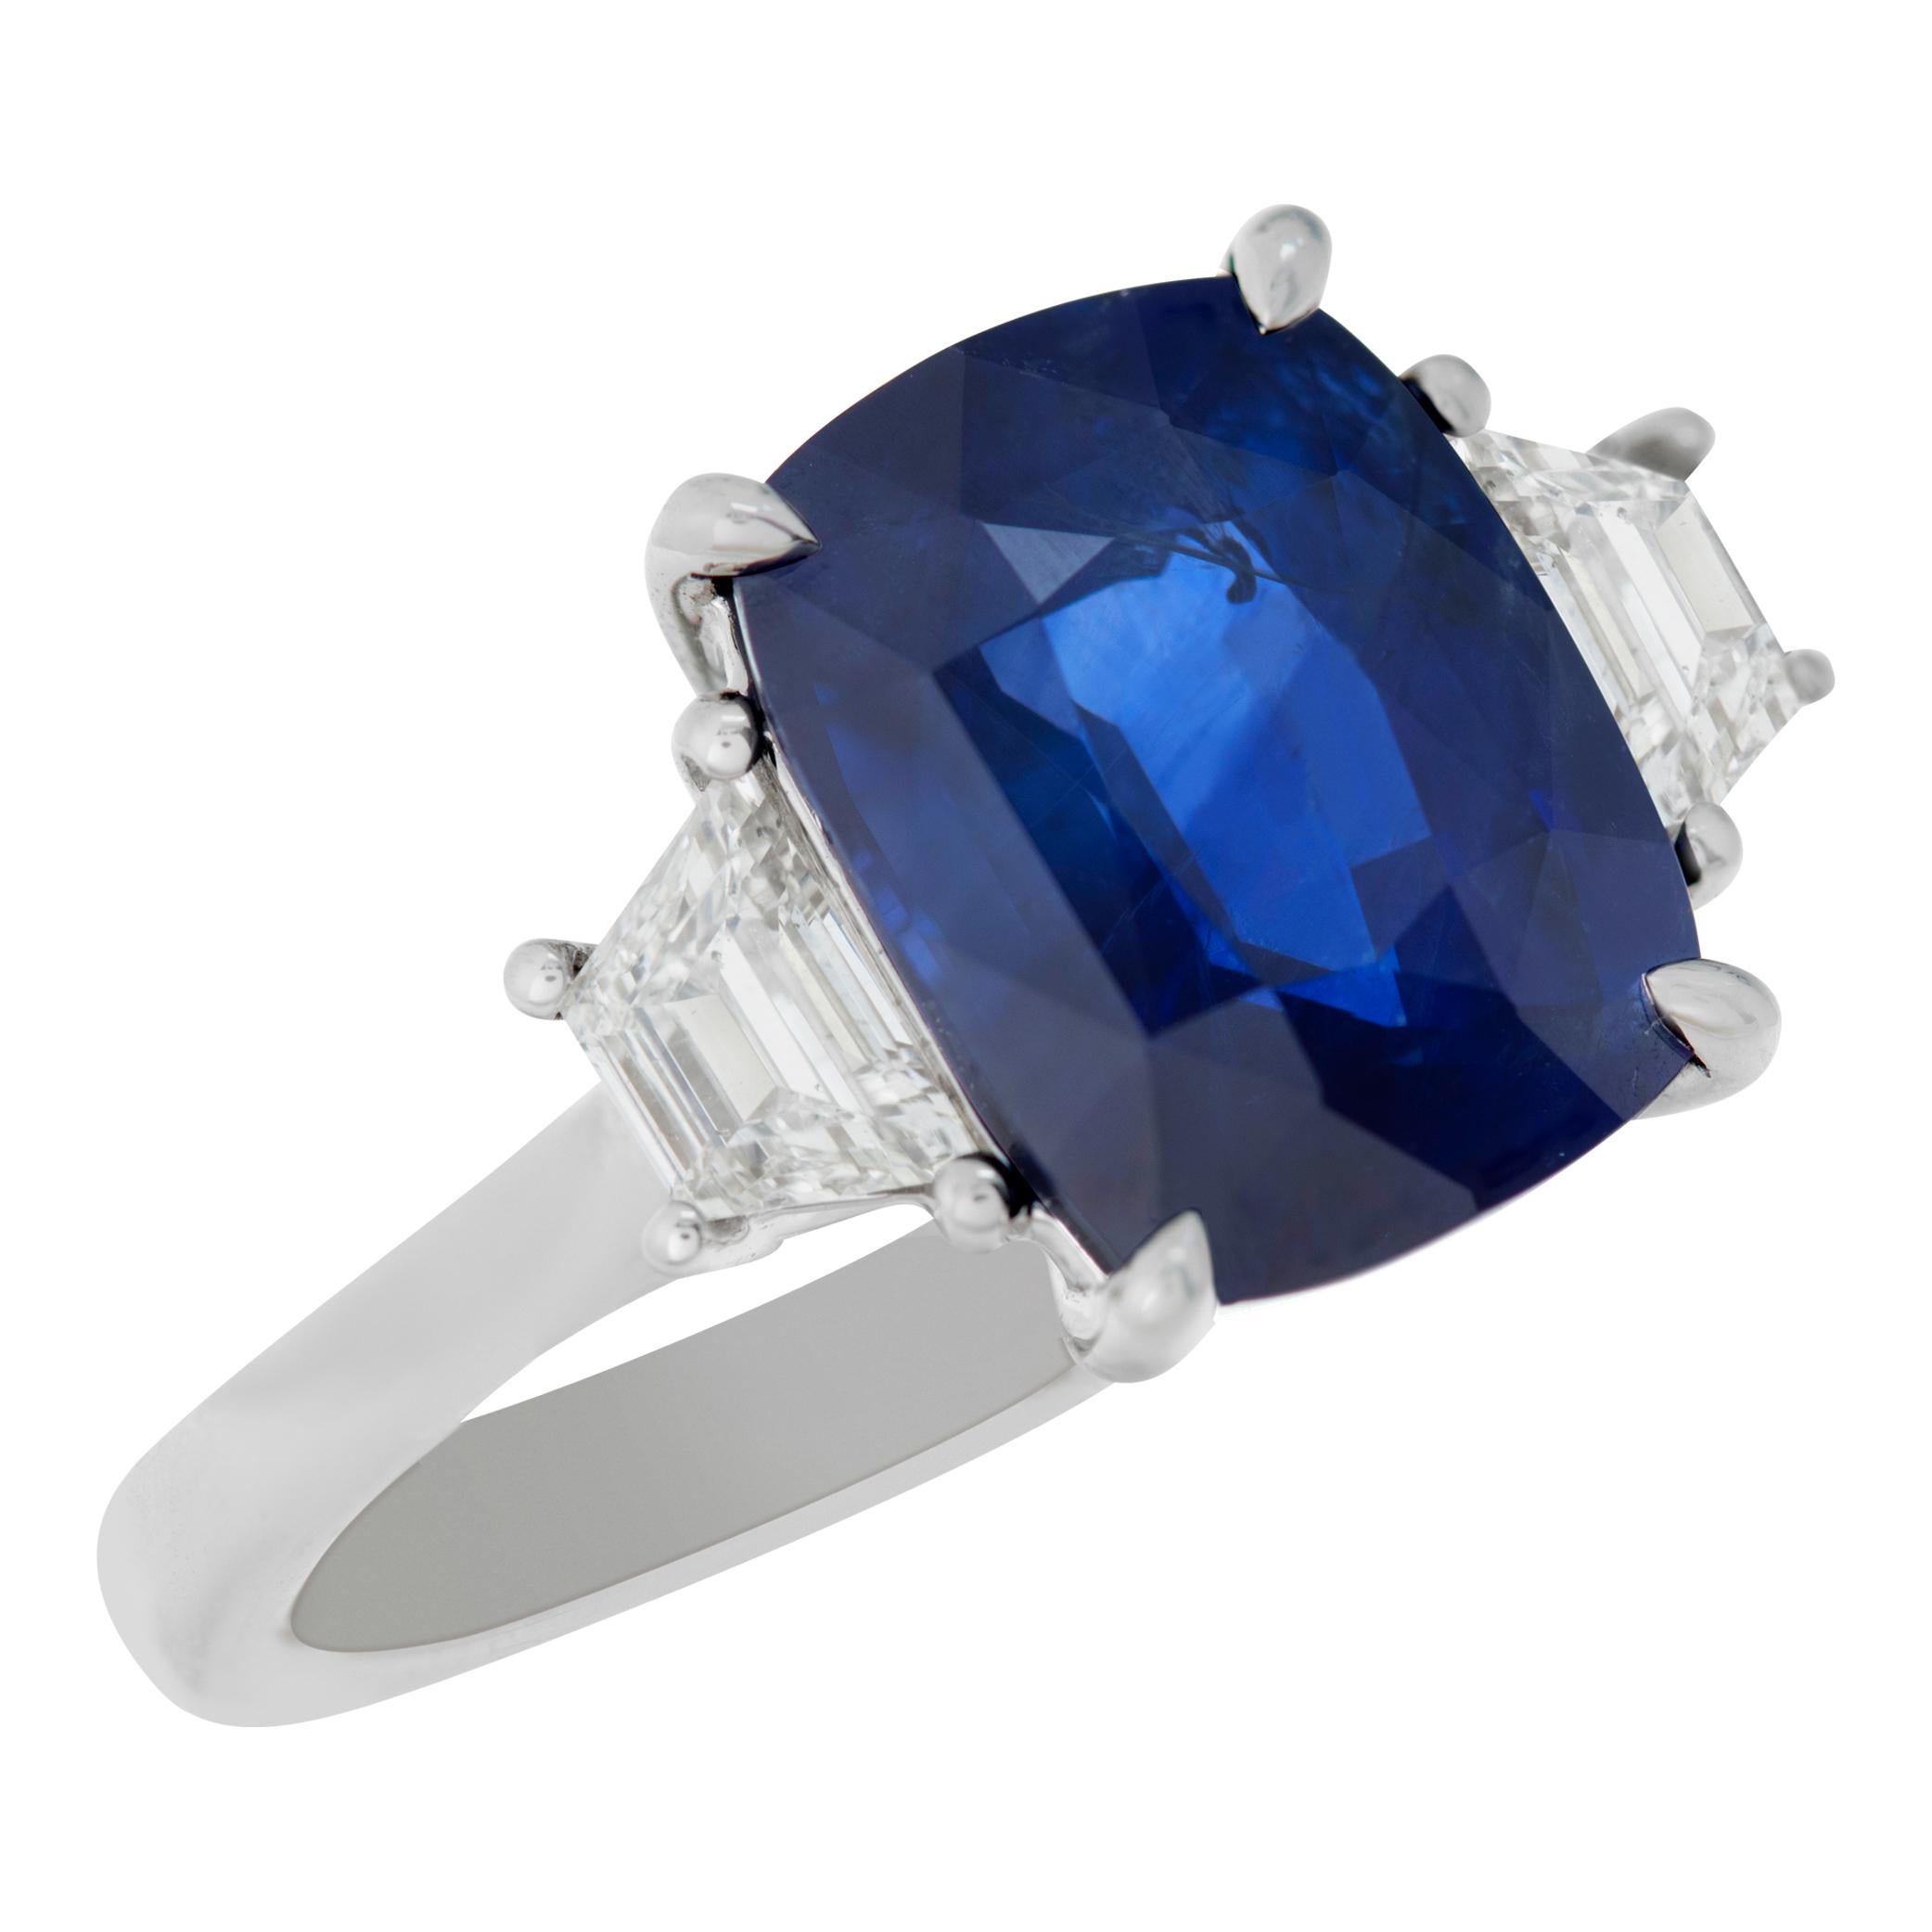 Cushion cut blue Sapphire & diamonds ring set in white gold In Excellent Condition For Sale In Surfside, FL